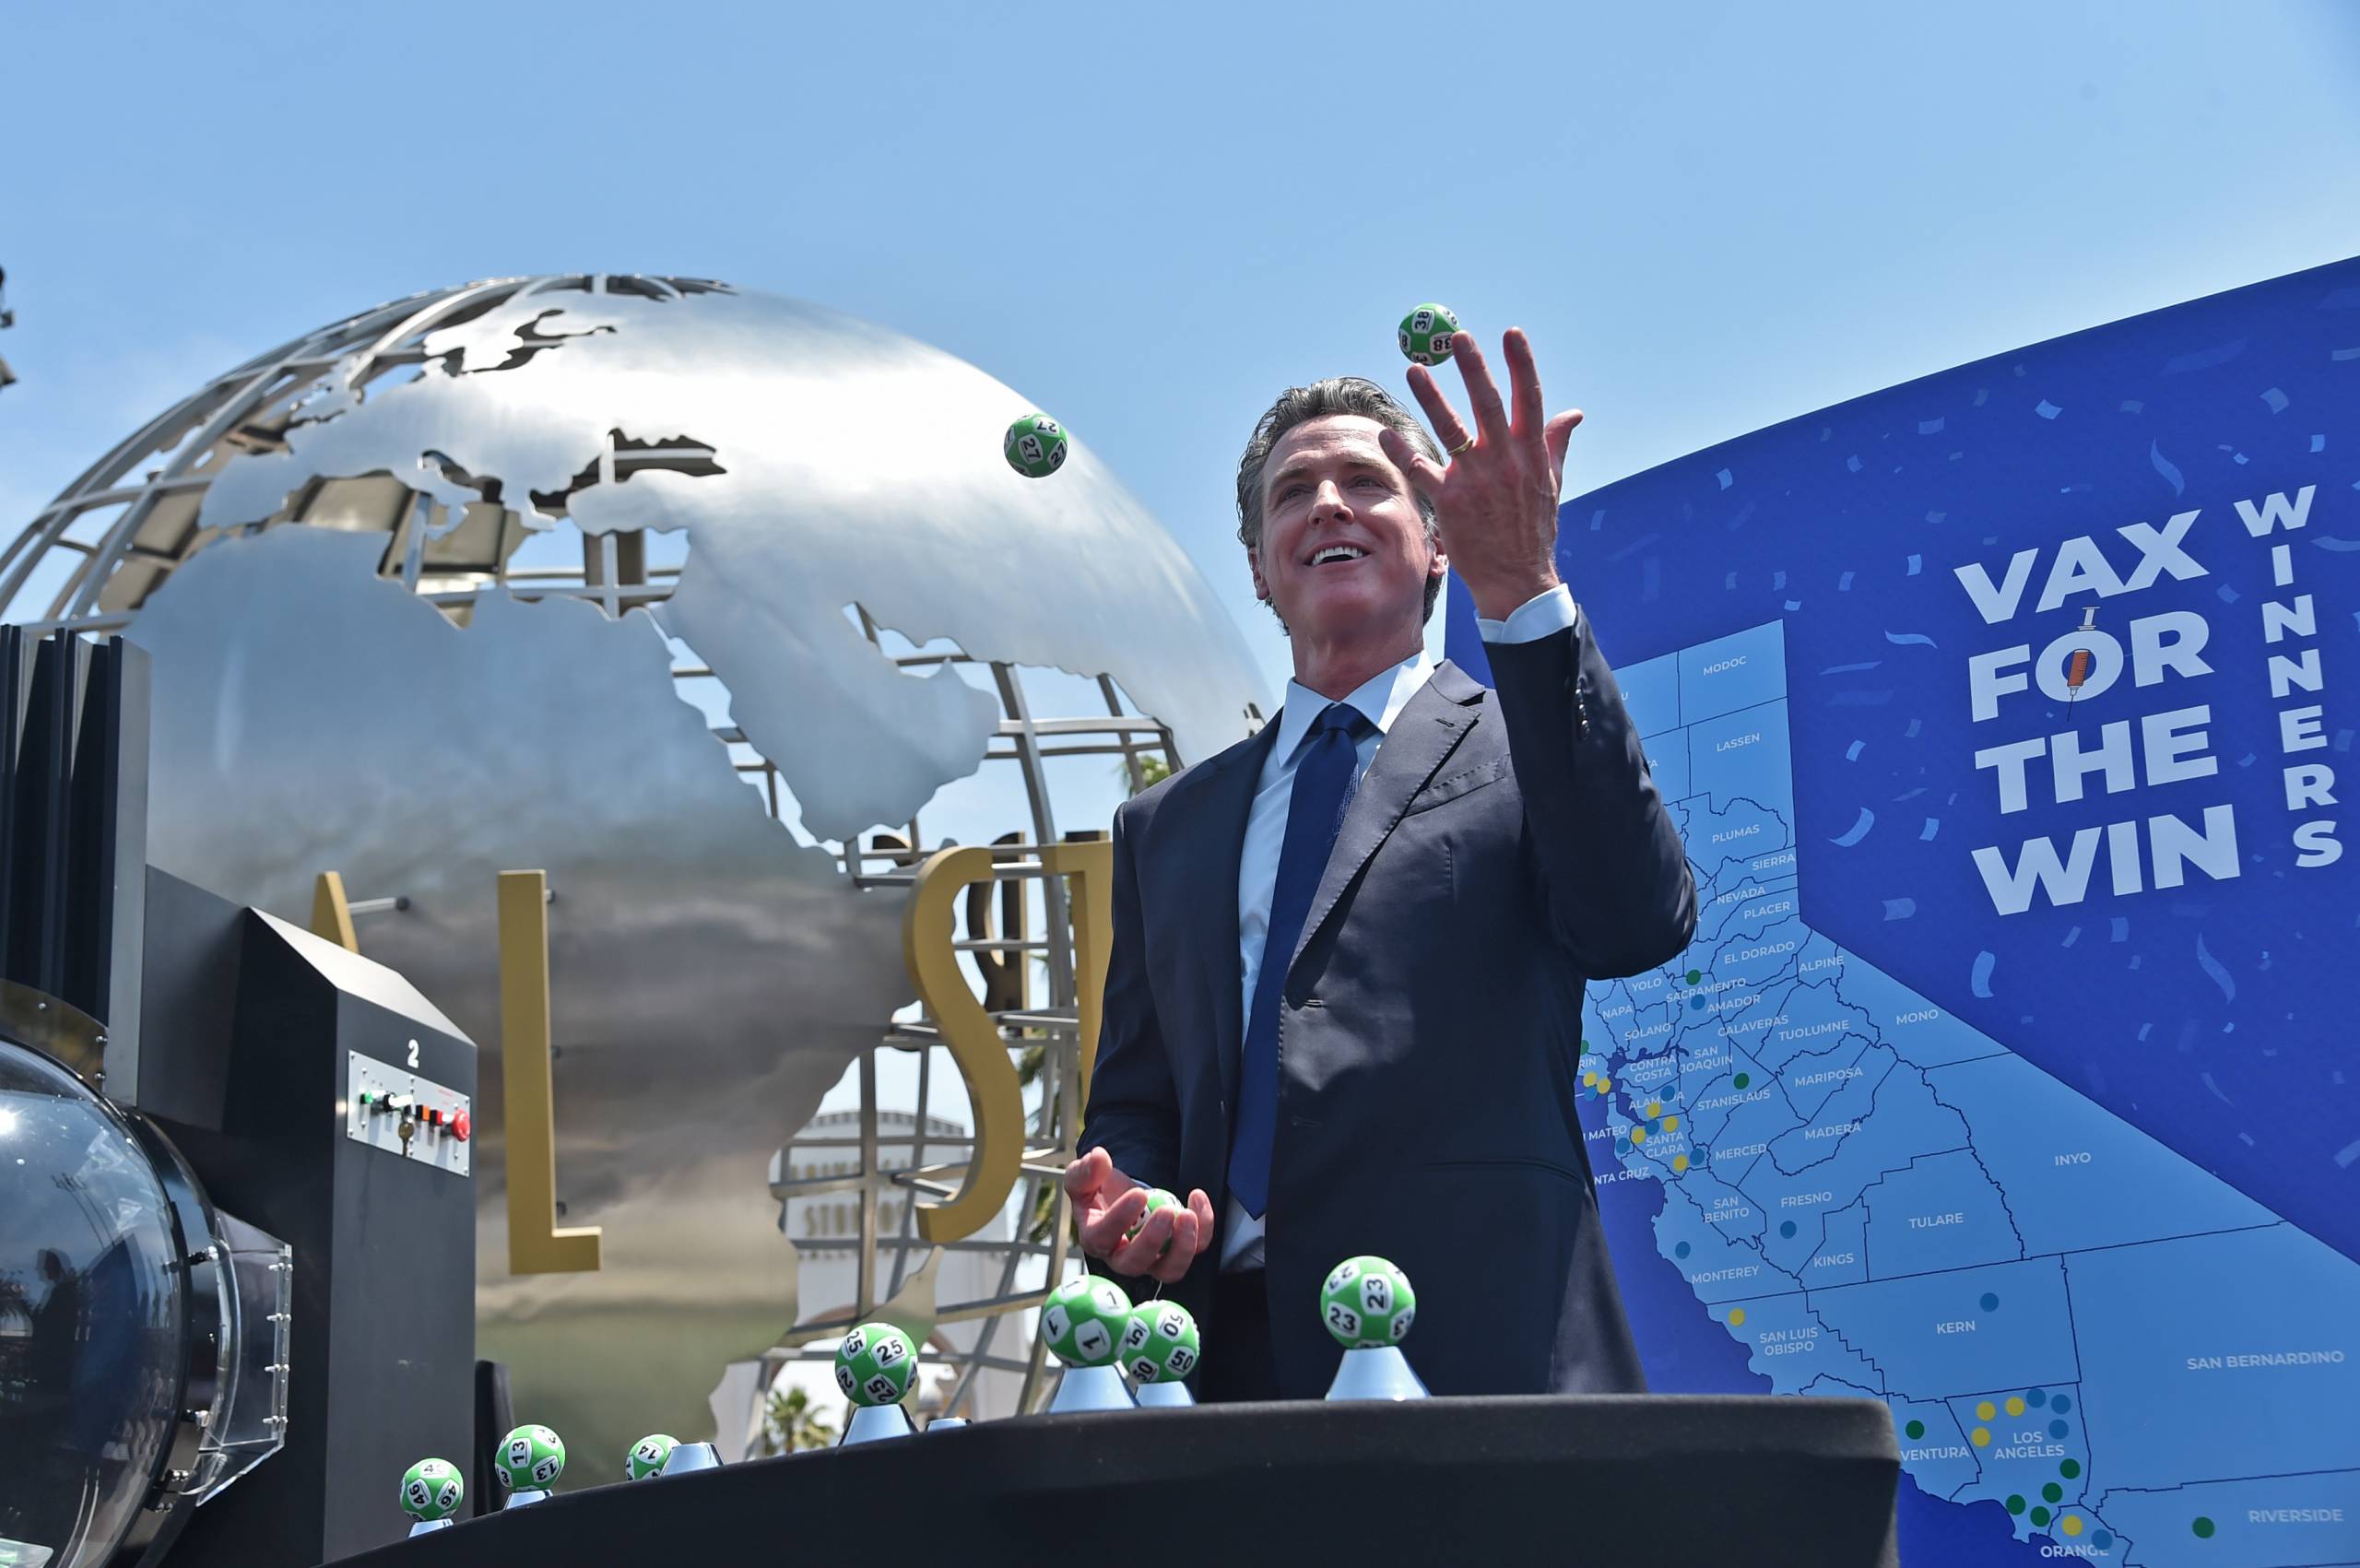 Gov. Newsom throws a few small lottery balls into the air in front of the Universal Studios globe statue.